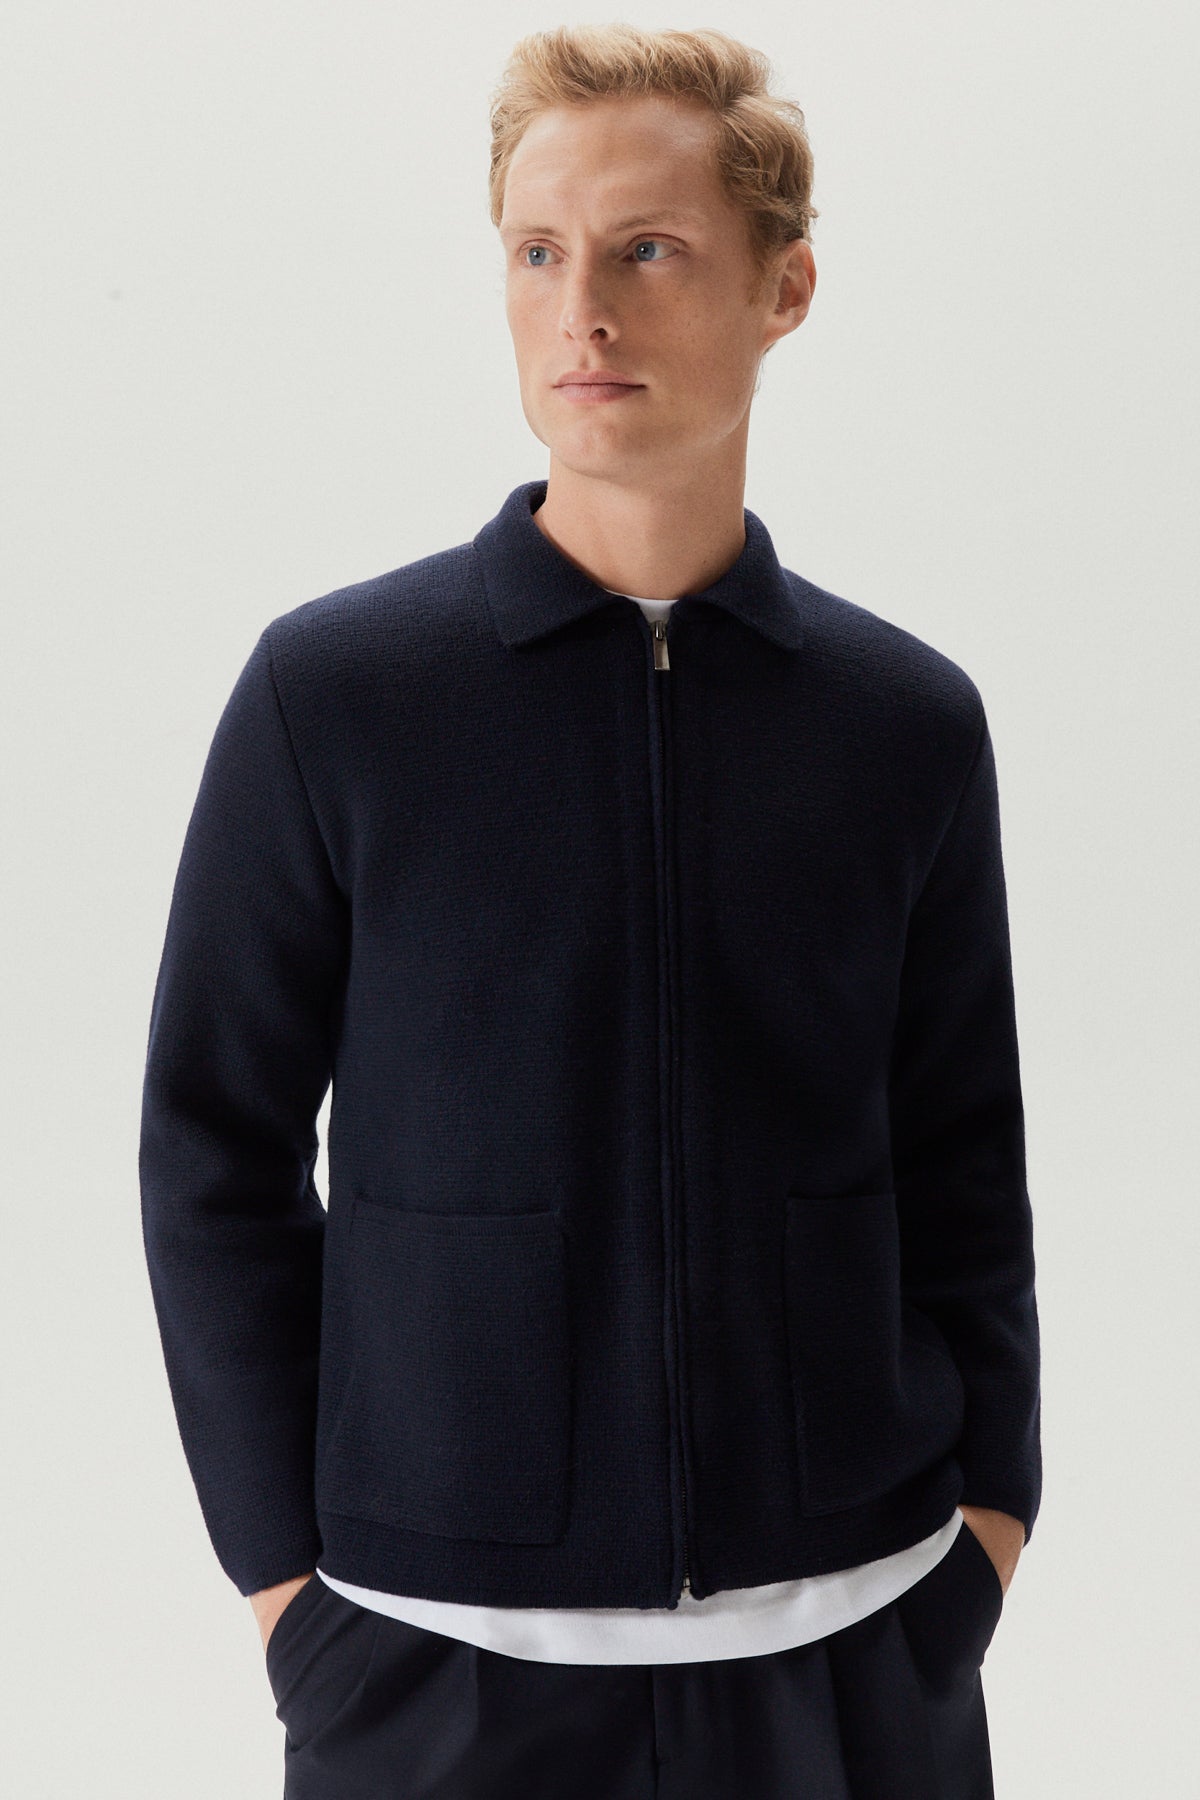 Oxford Blue | The Boiled Wool Zip Jacket